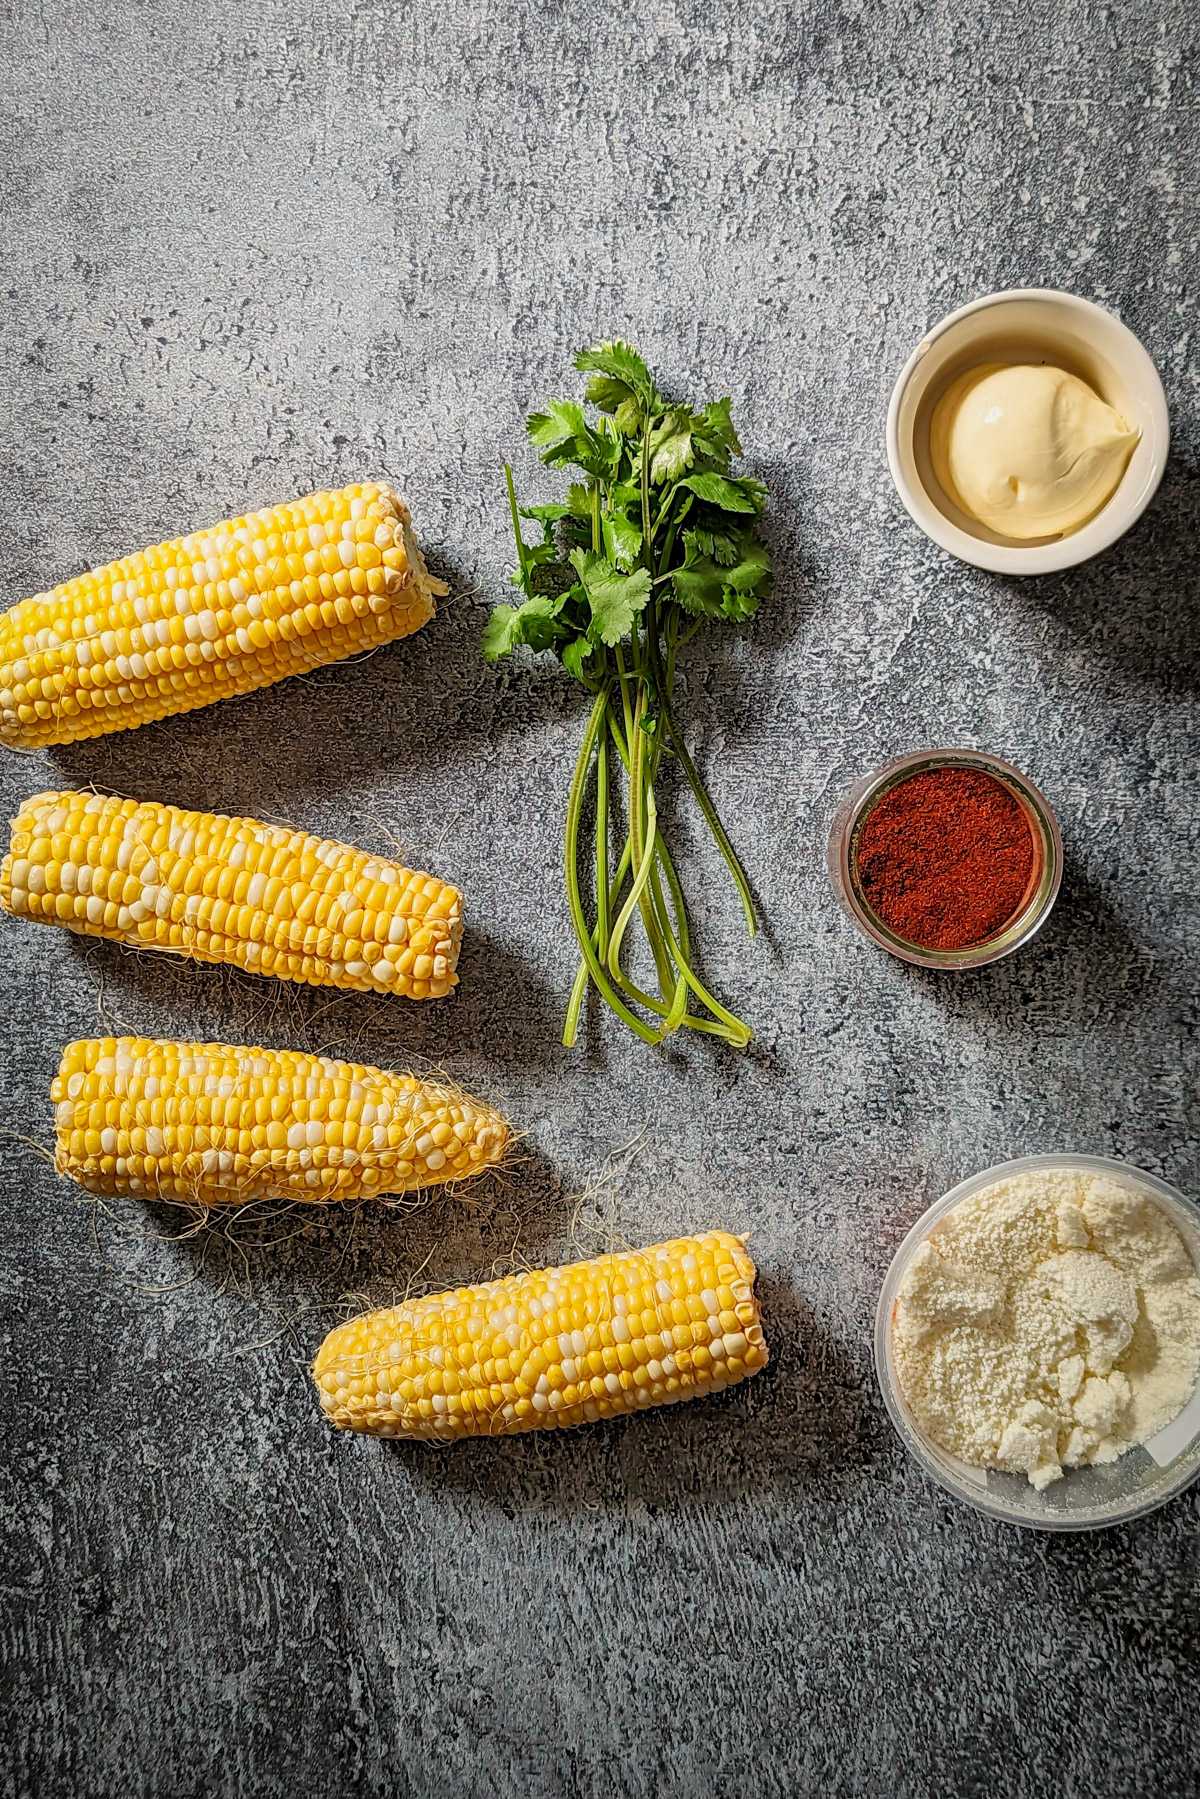 Ingredients for elotes Mexicano.